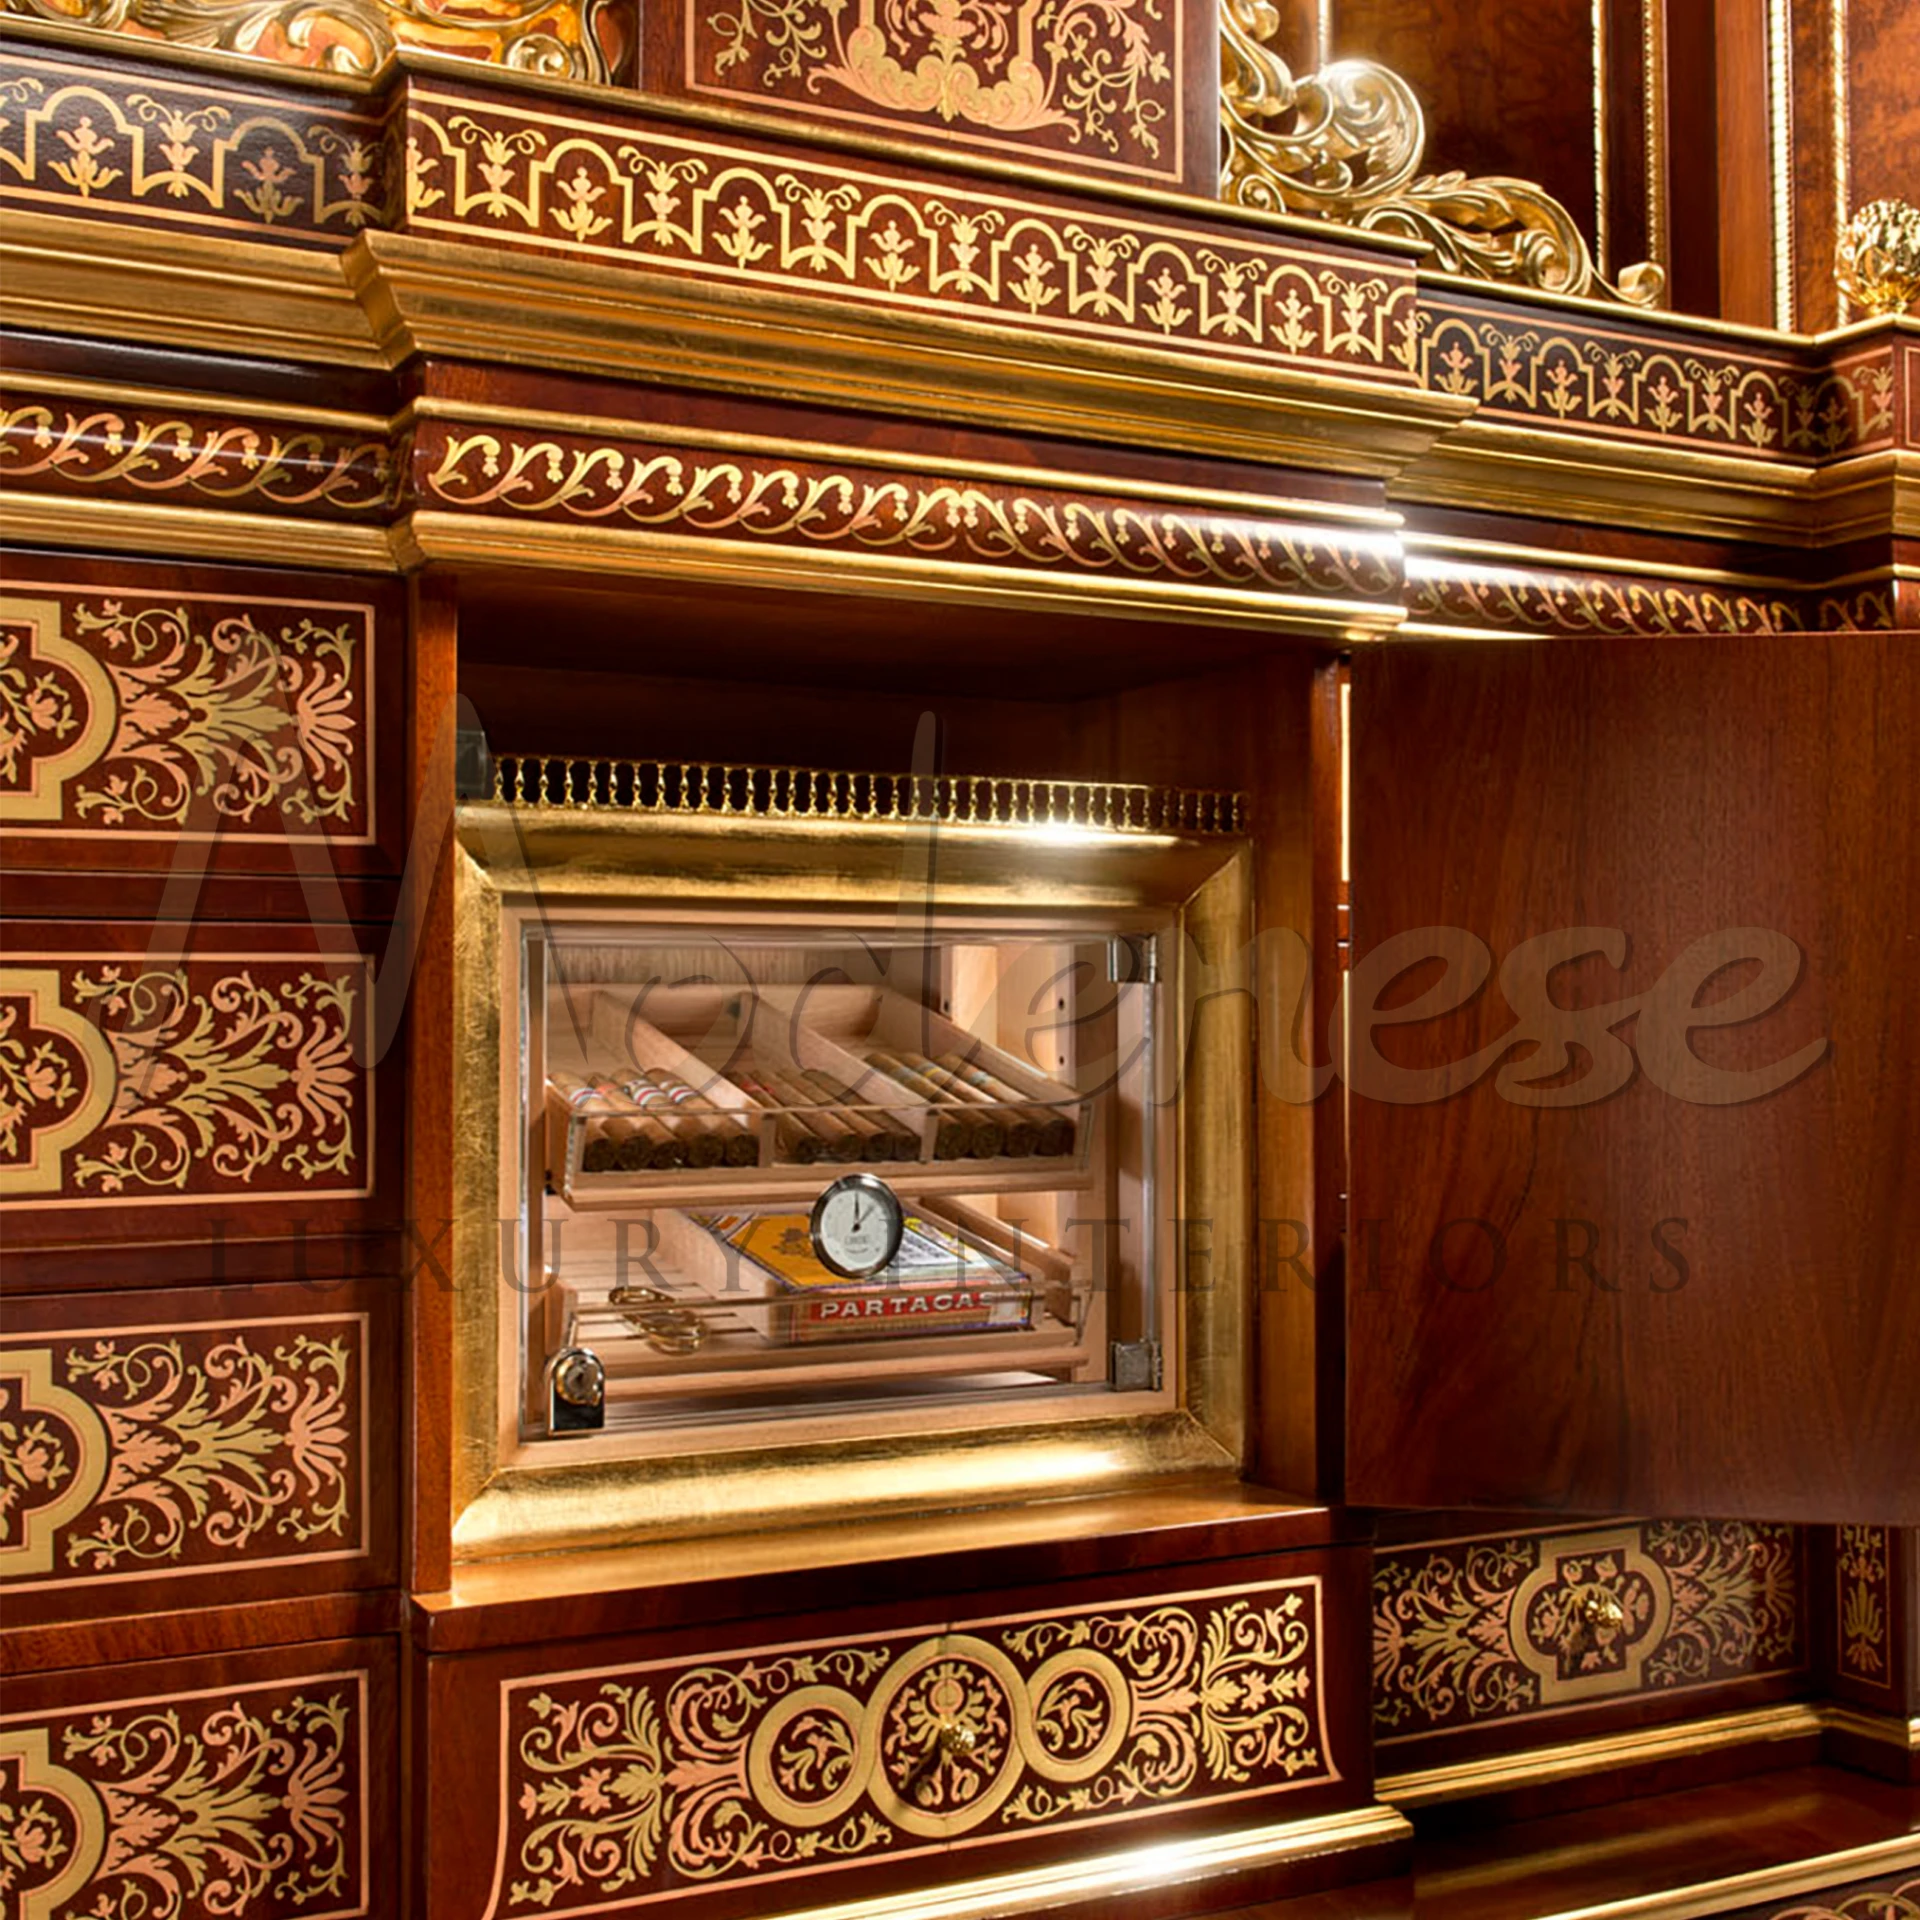 Discover unparalleled elegance with Modenese's high-end cigar cabinet, boasting hand-carved designs and shiny gold leaf decorations on a walnut finish.